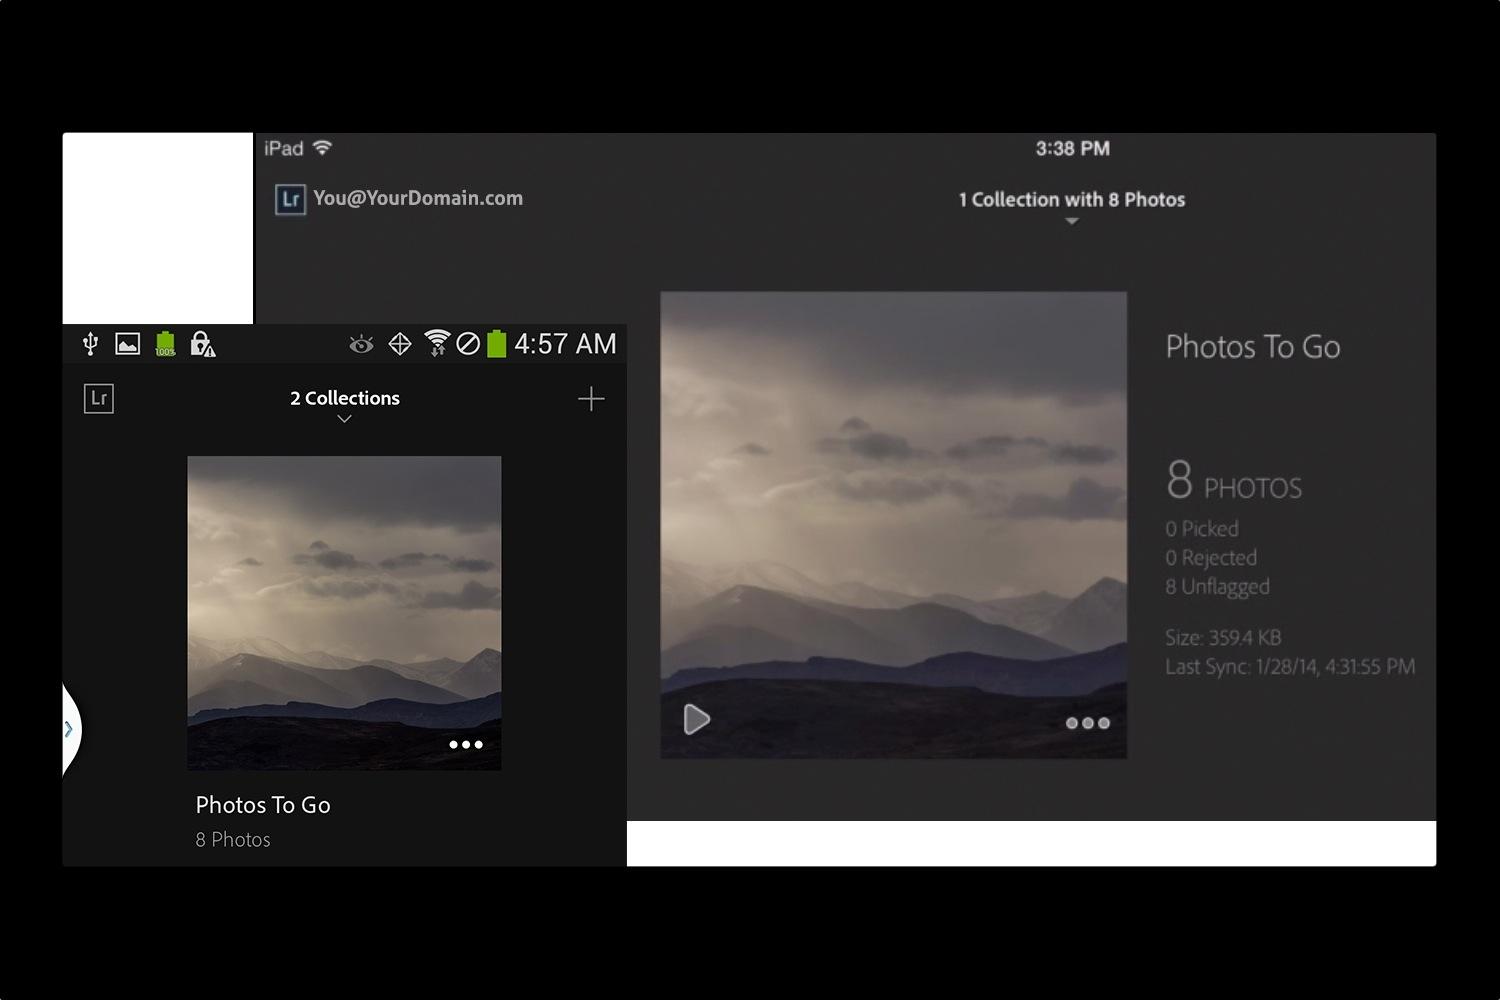 adobe lightroom mobiles photo editing tools now available android 4